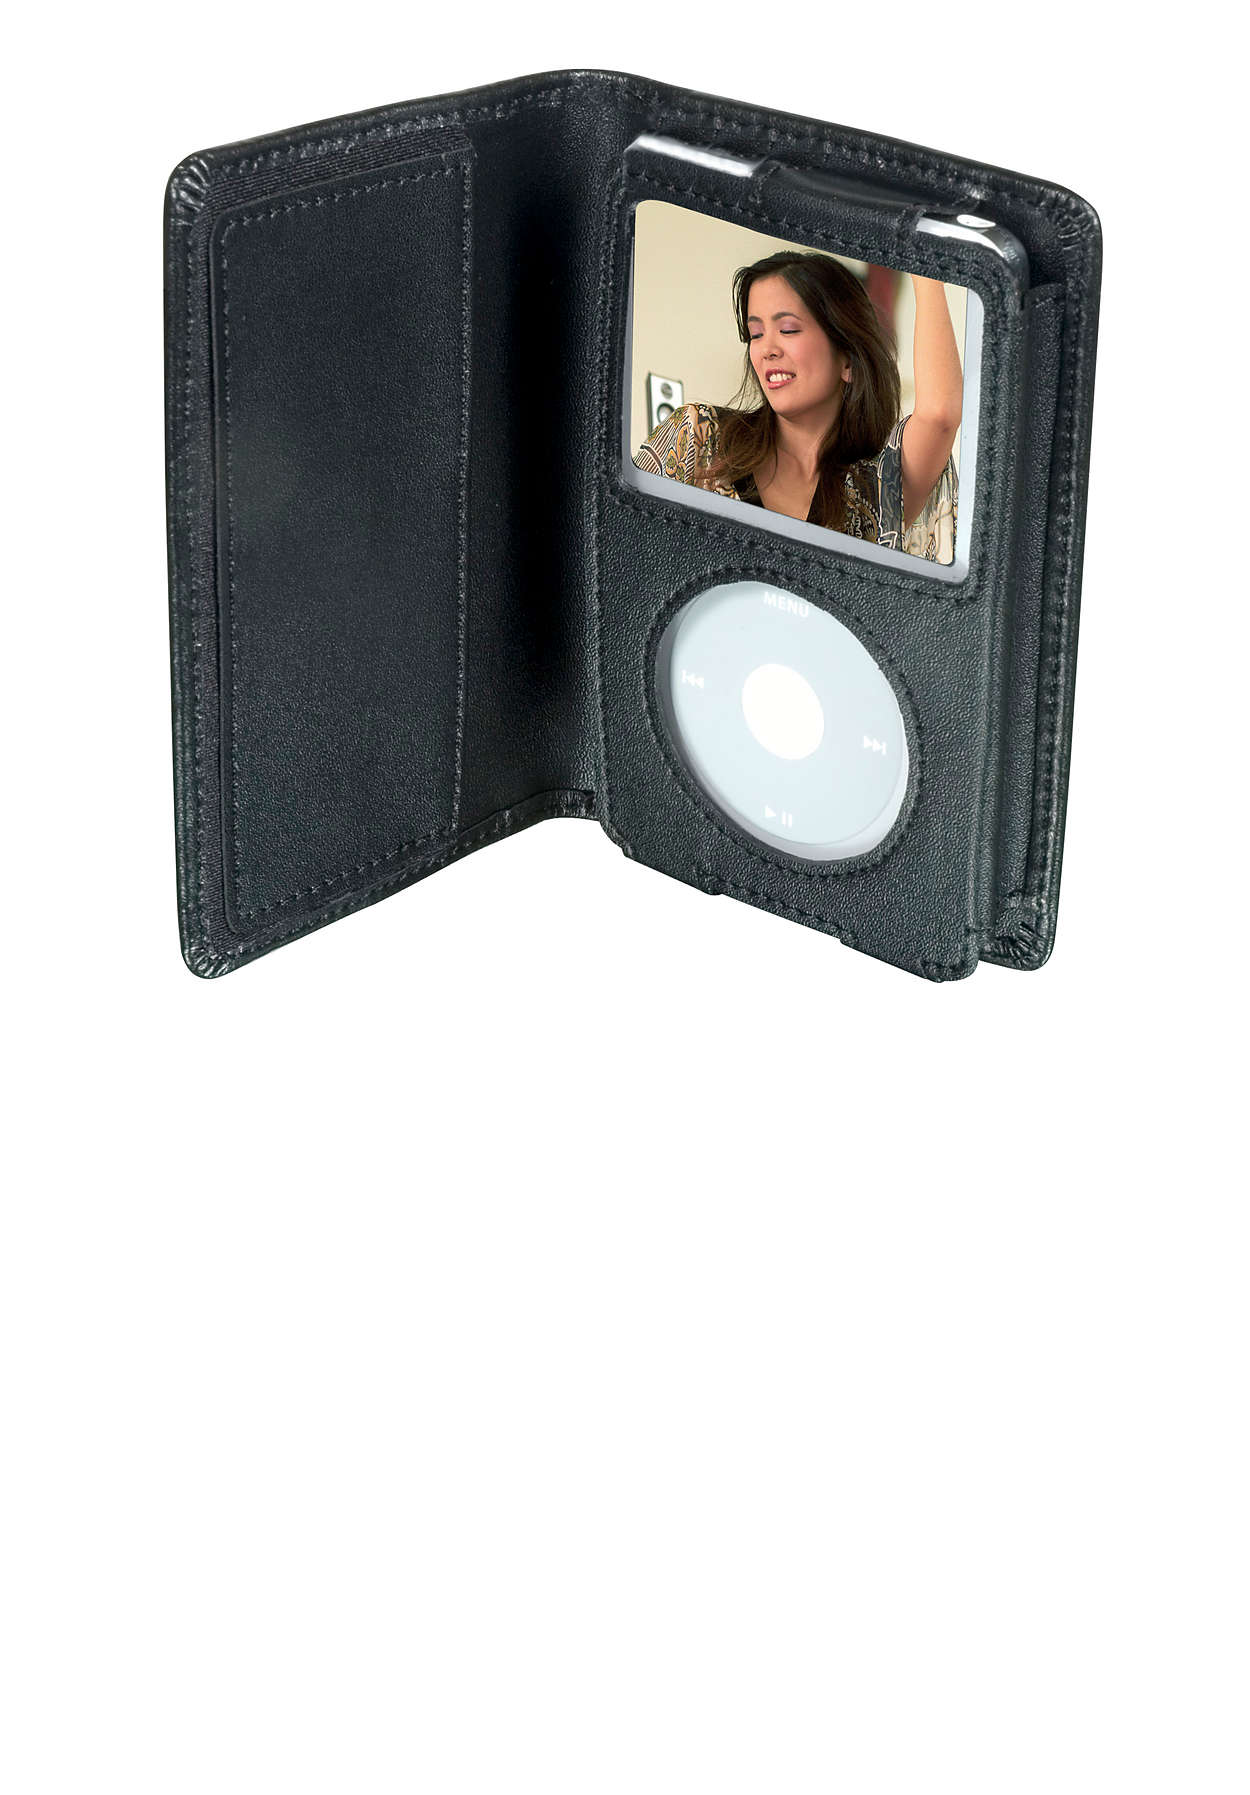 Protect your iPod video in style